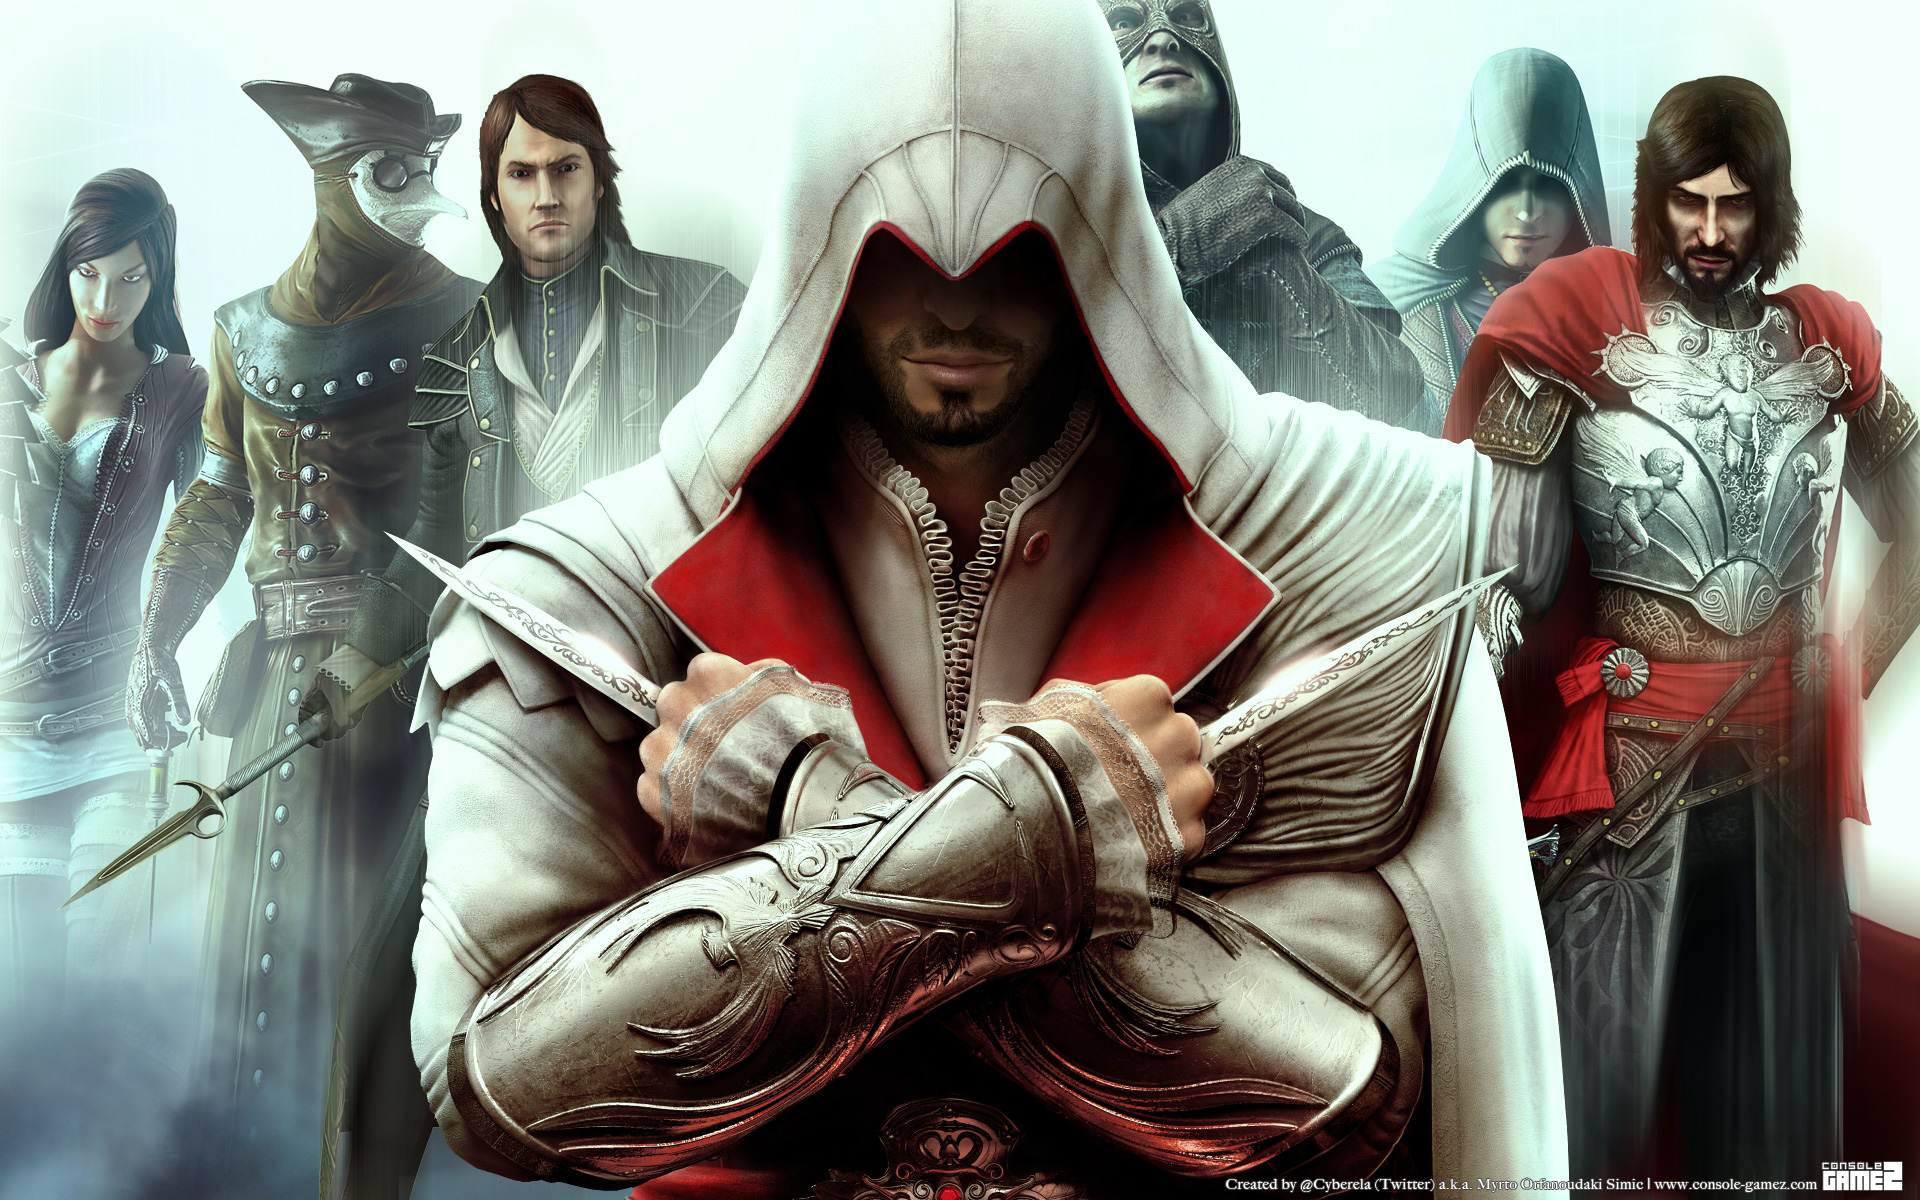 Console Gamez: Assassin's Creed Brotherhood